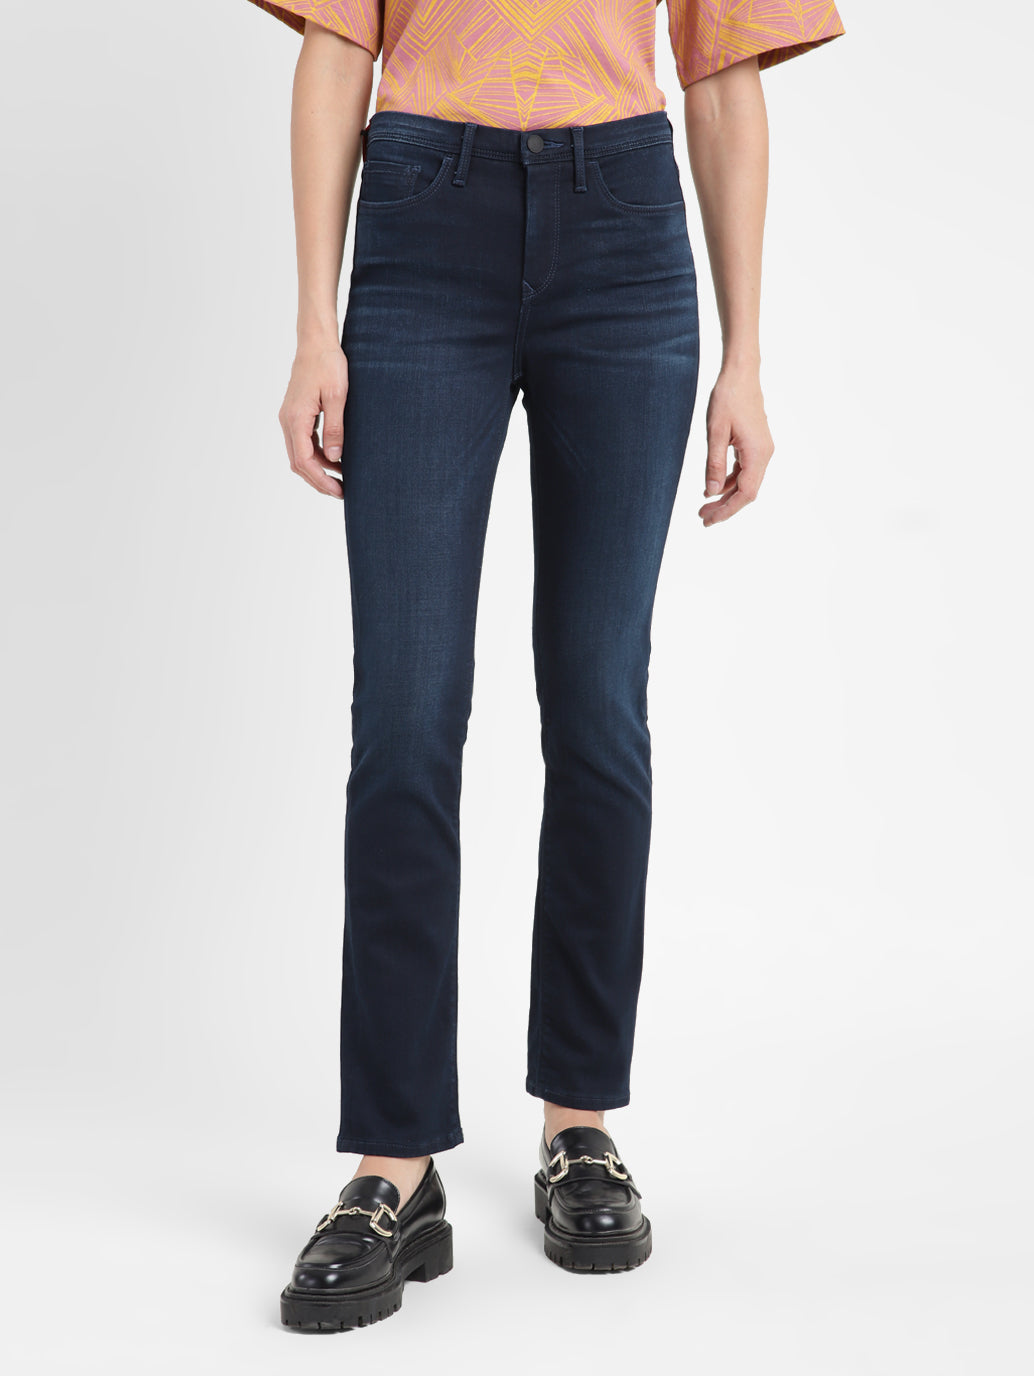 Women's High Rise 312 Slim Fit Jeans